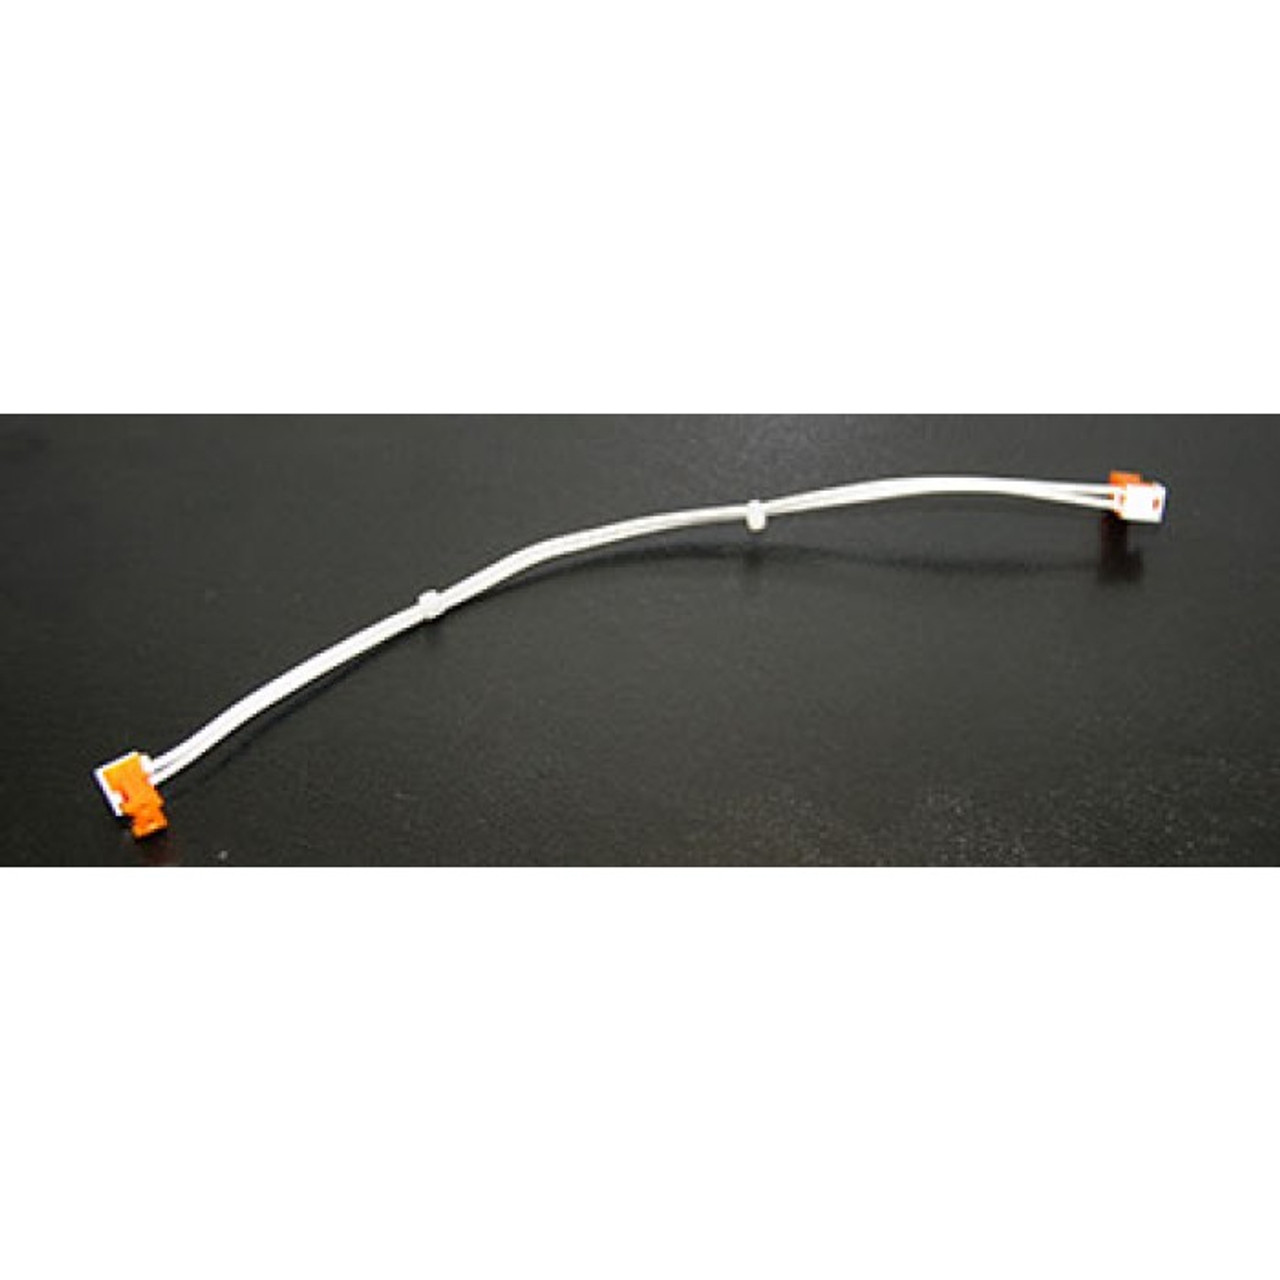 R20778-G1 - Monochrome Display Cable